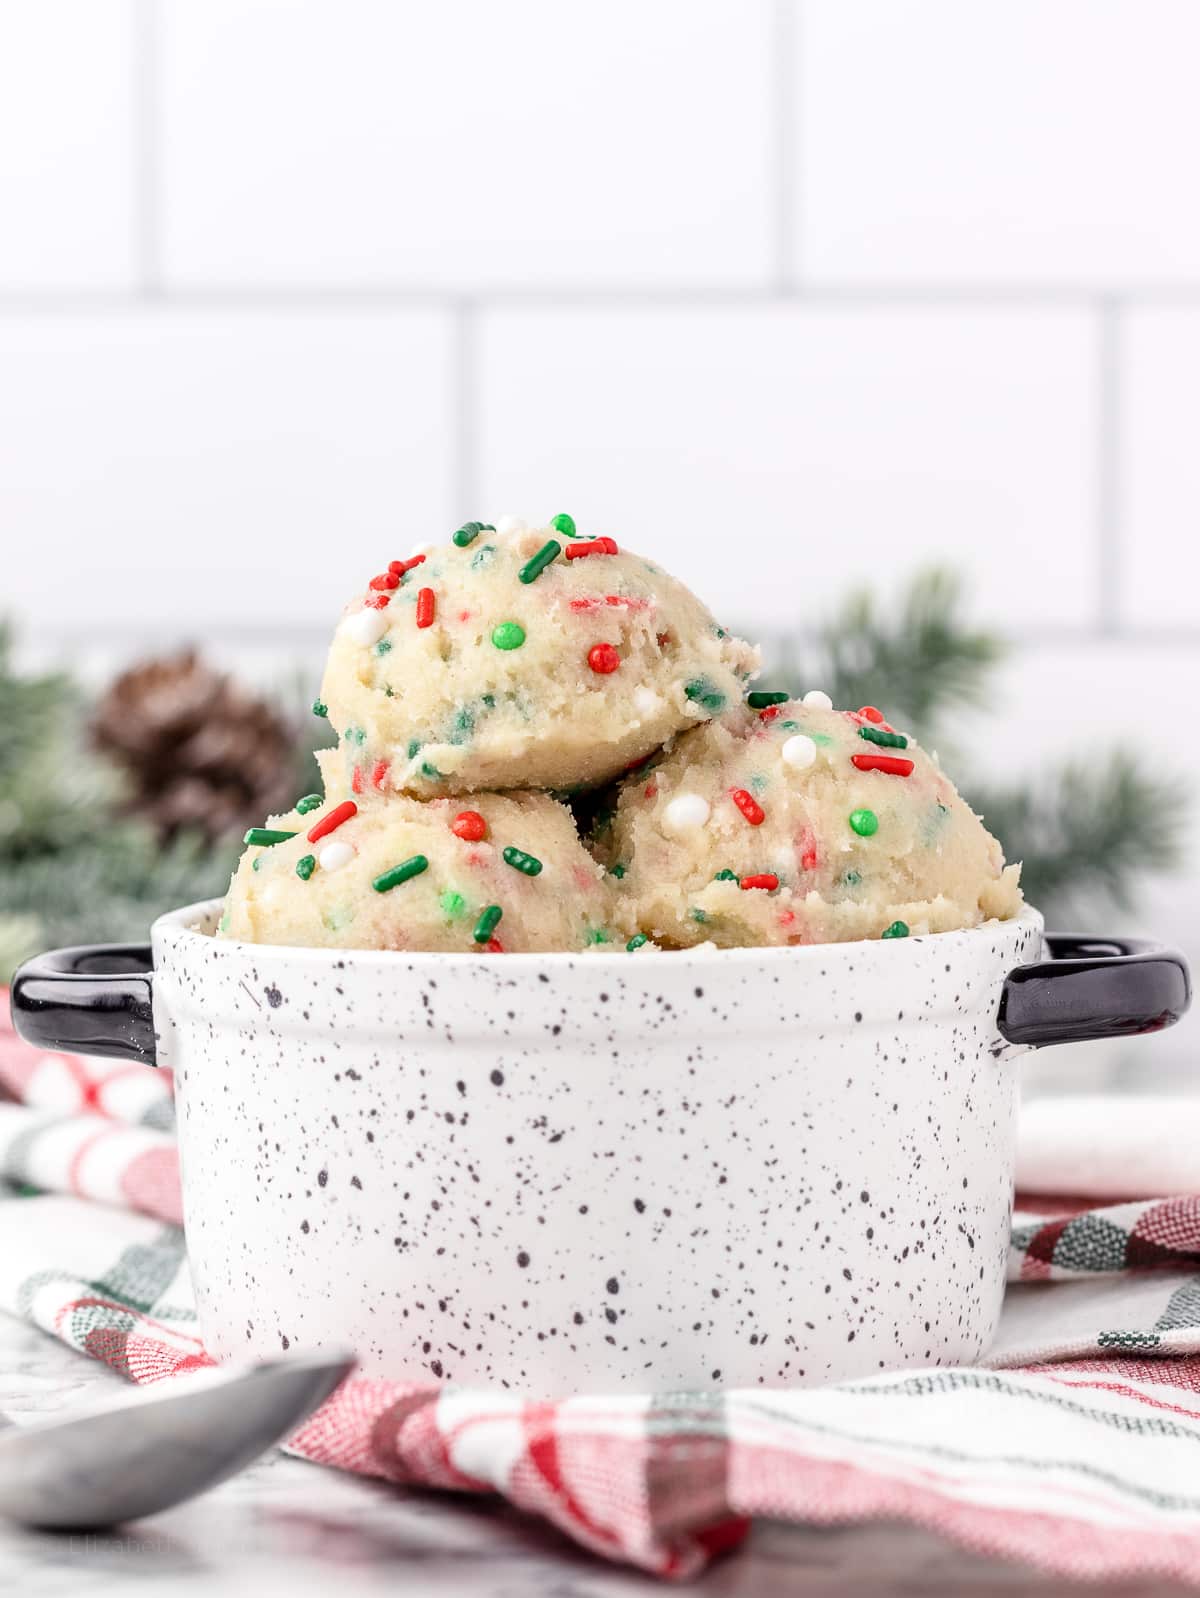 Edible Cookie Dough in a handled bowl with a spoon on the side.